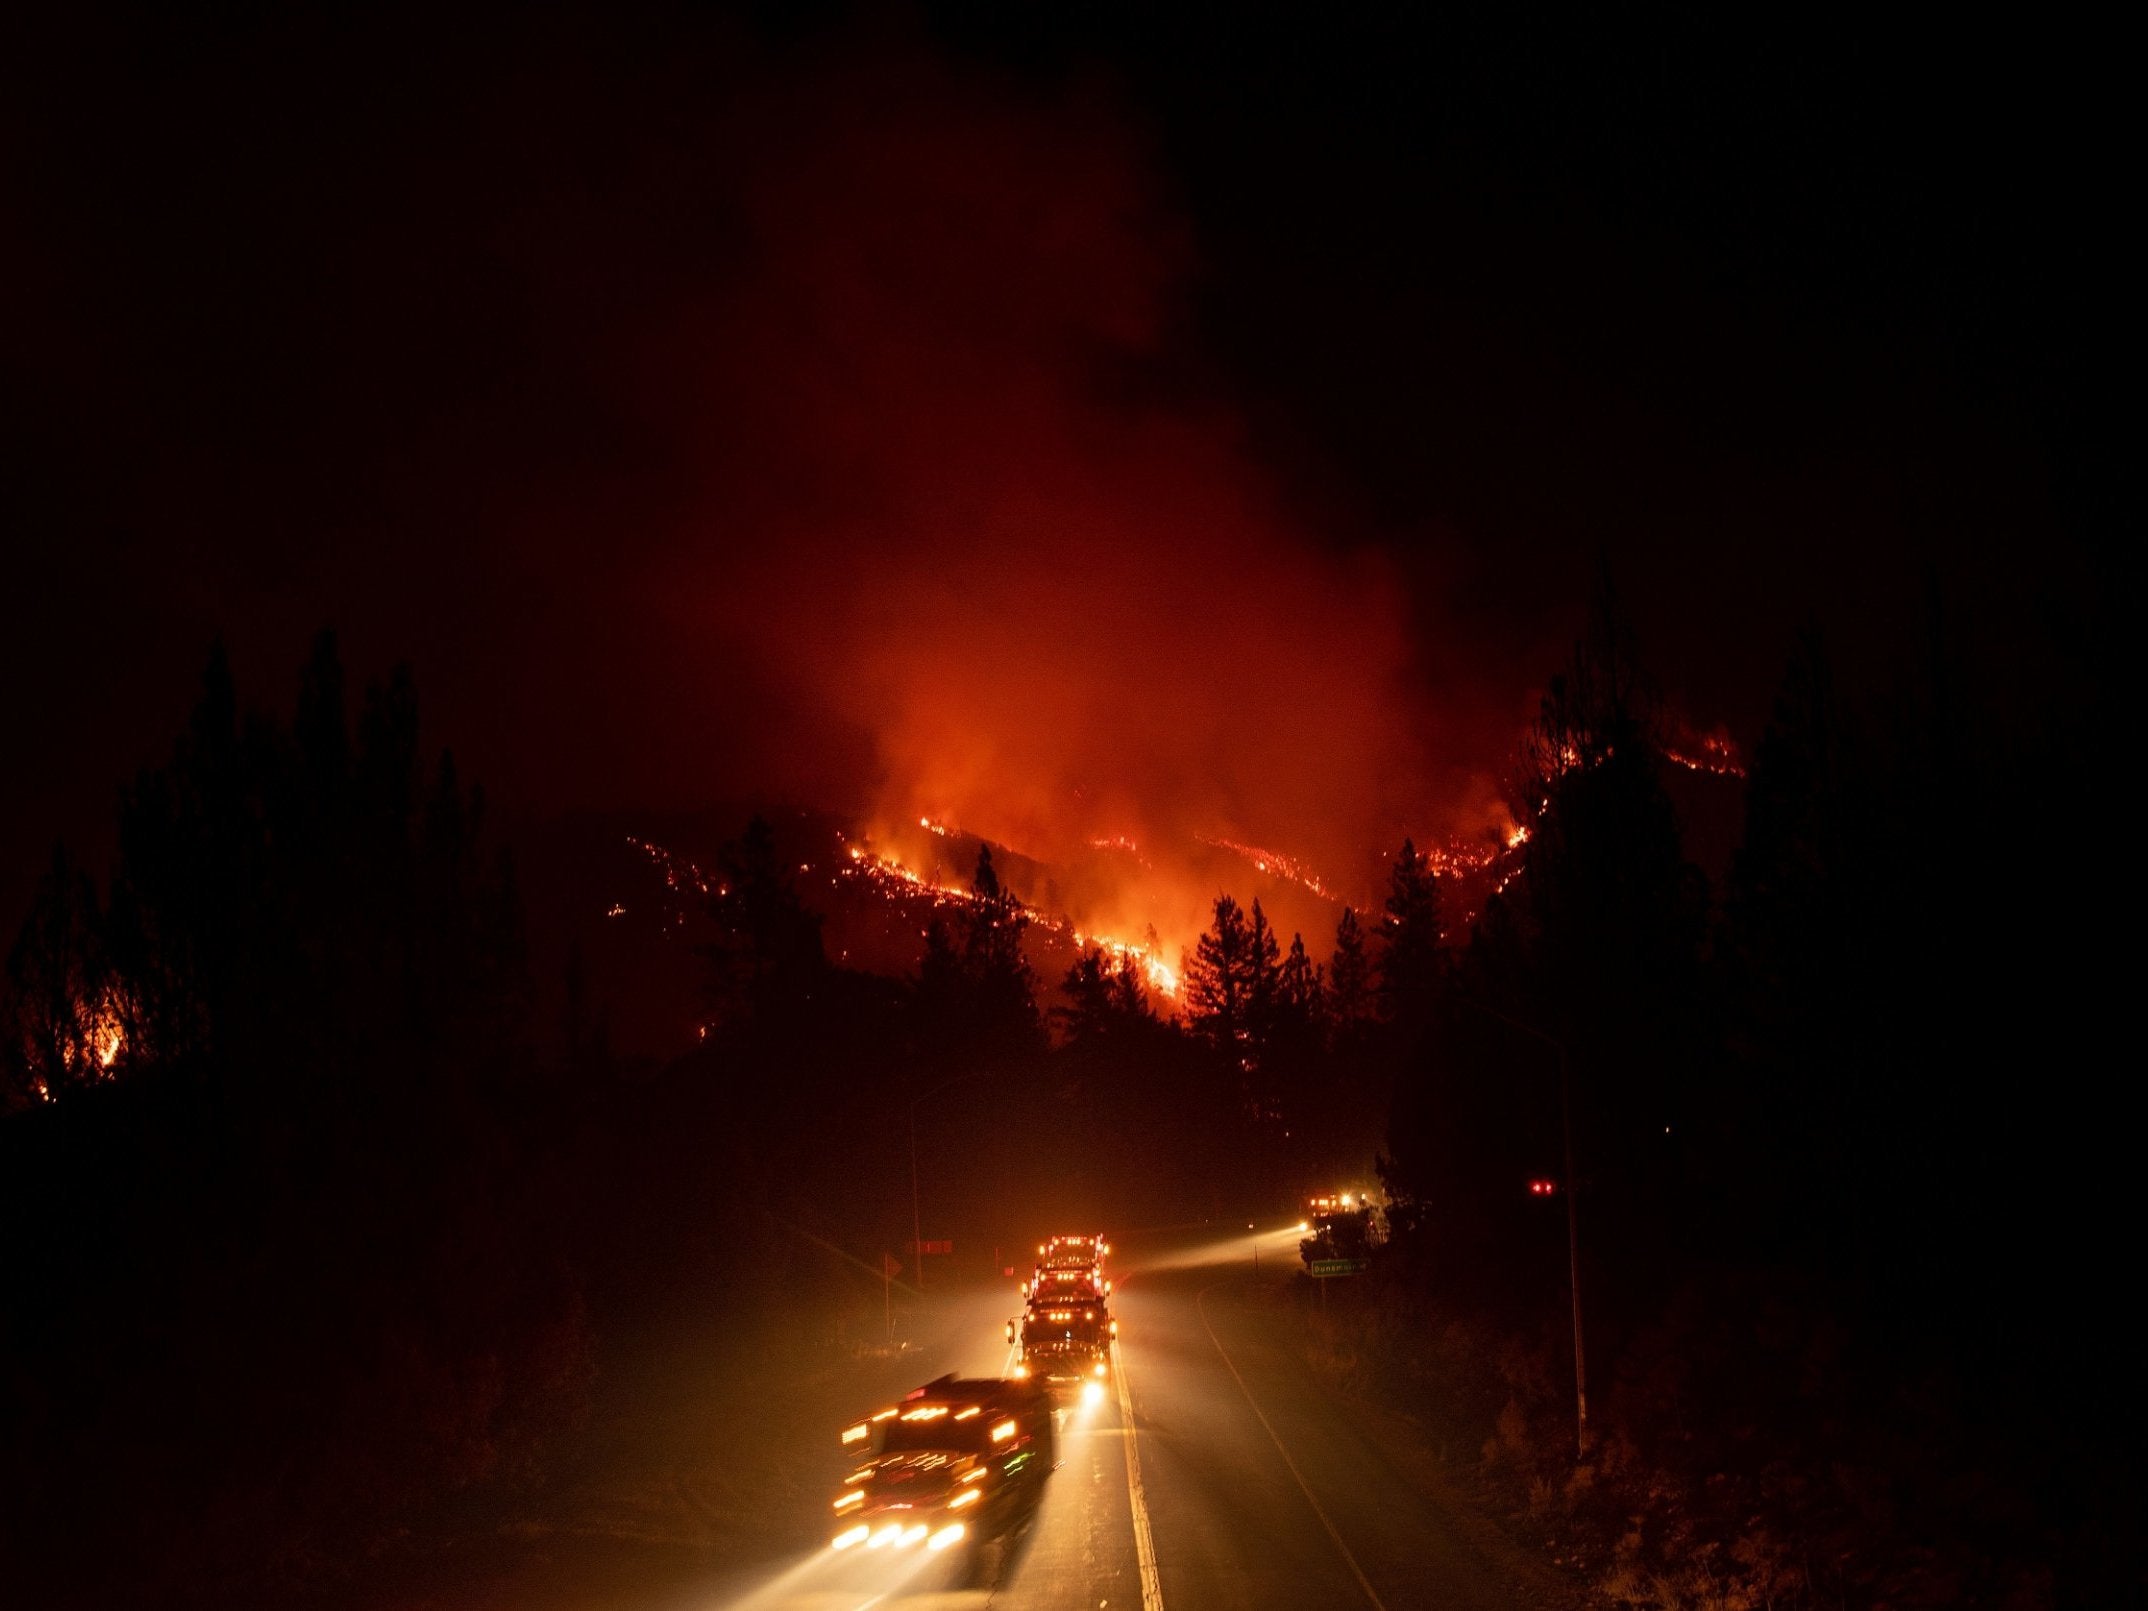 Fire trucks drive away from a burning hillside during the Delta Fire in California